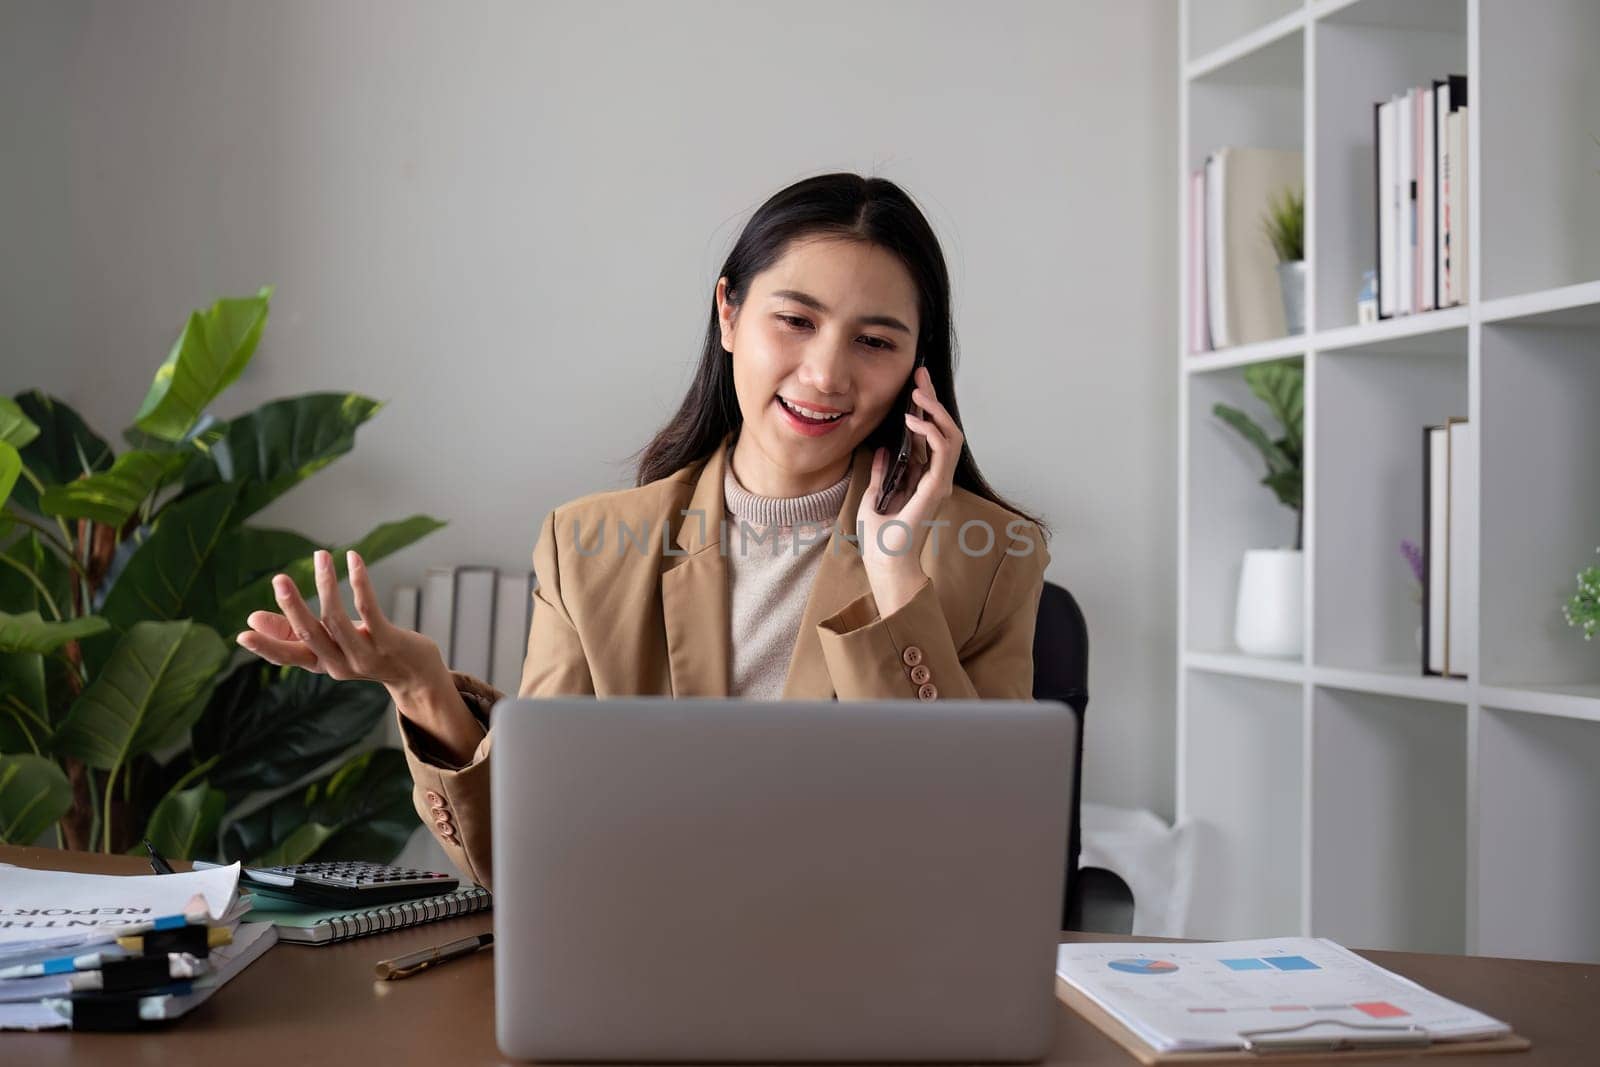 Unhappy Asian business woman shows stress over unsuccessful business while working in home office decorated with soothing green plants..